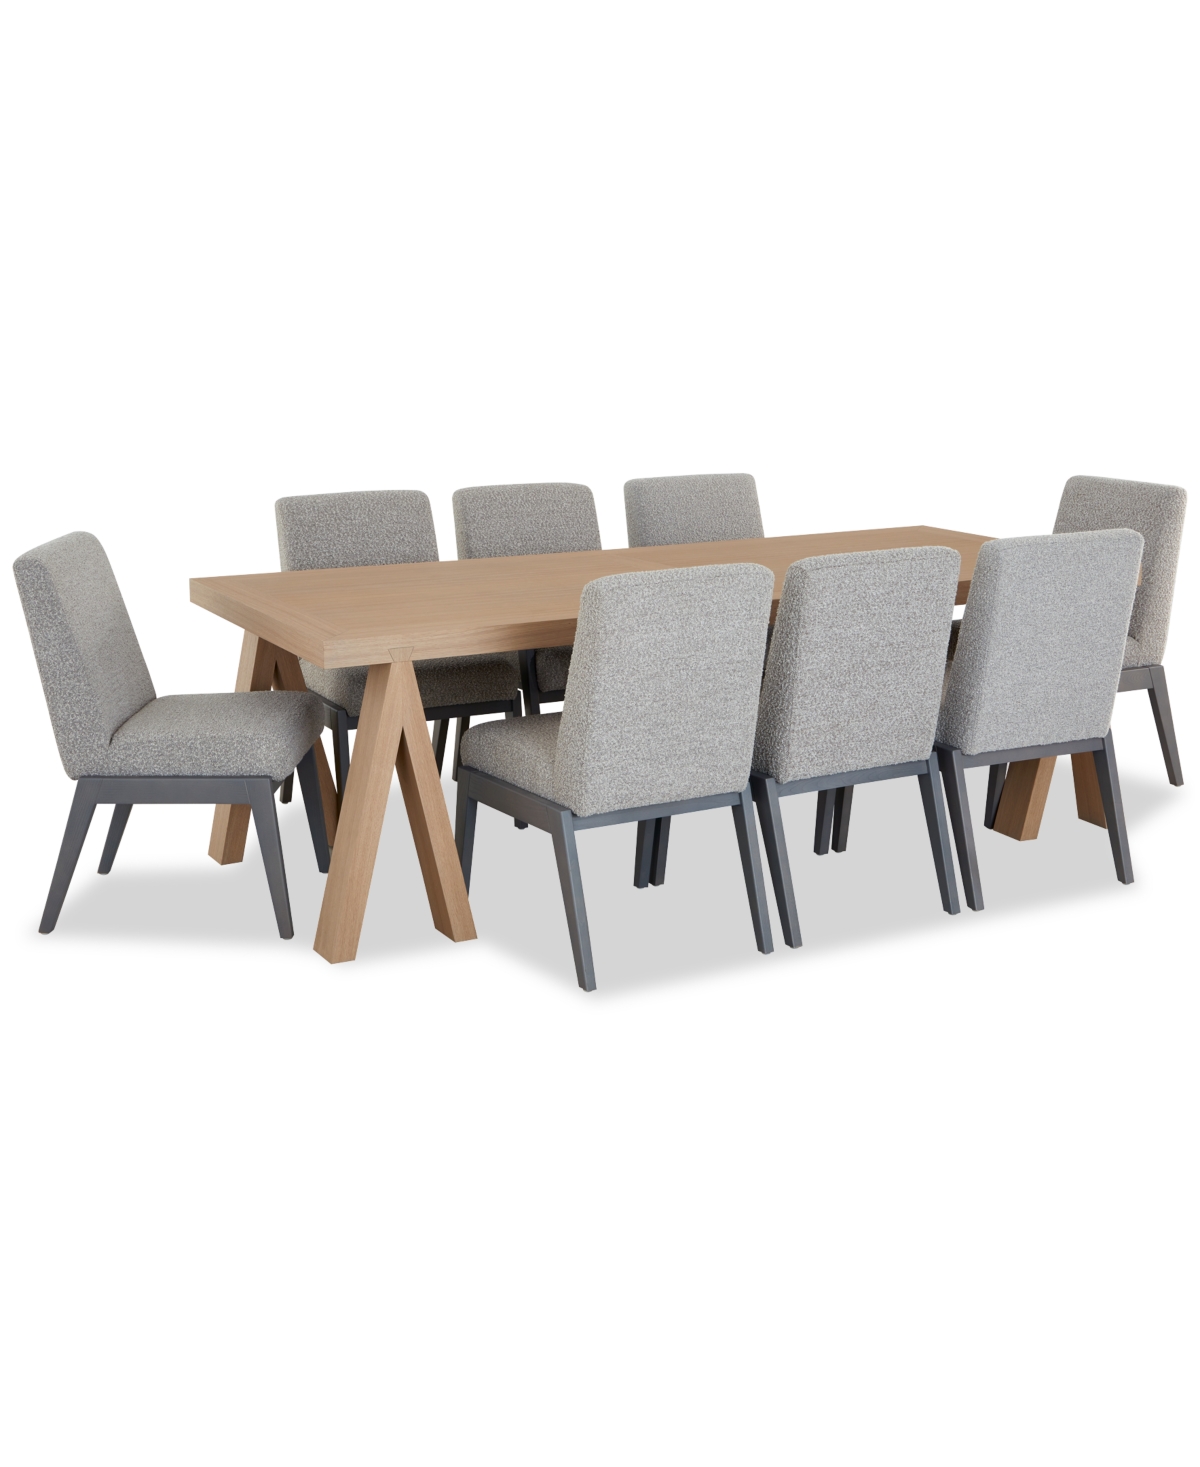 Drexel Atwell 9pc Dining Set (table + 8 Side Chairs) In No Color